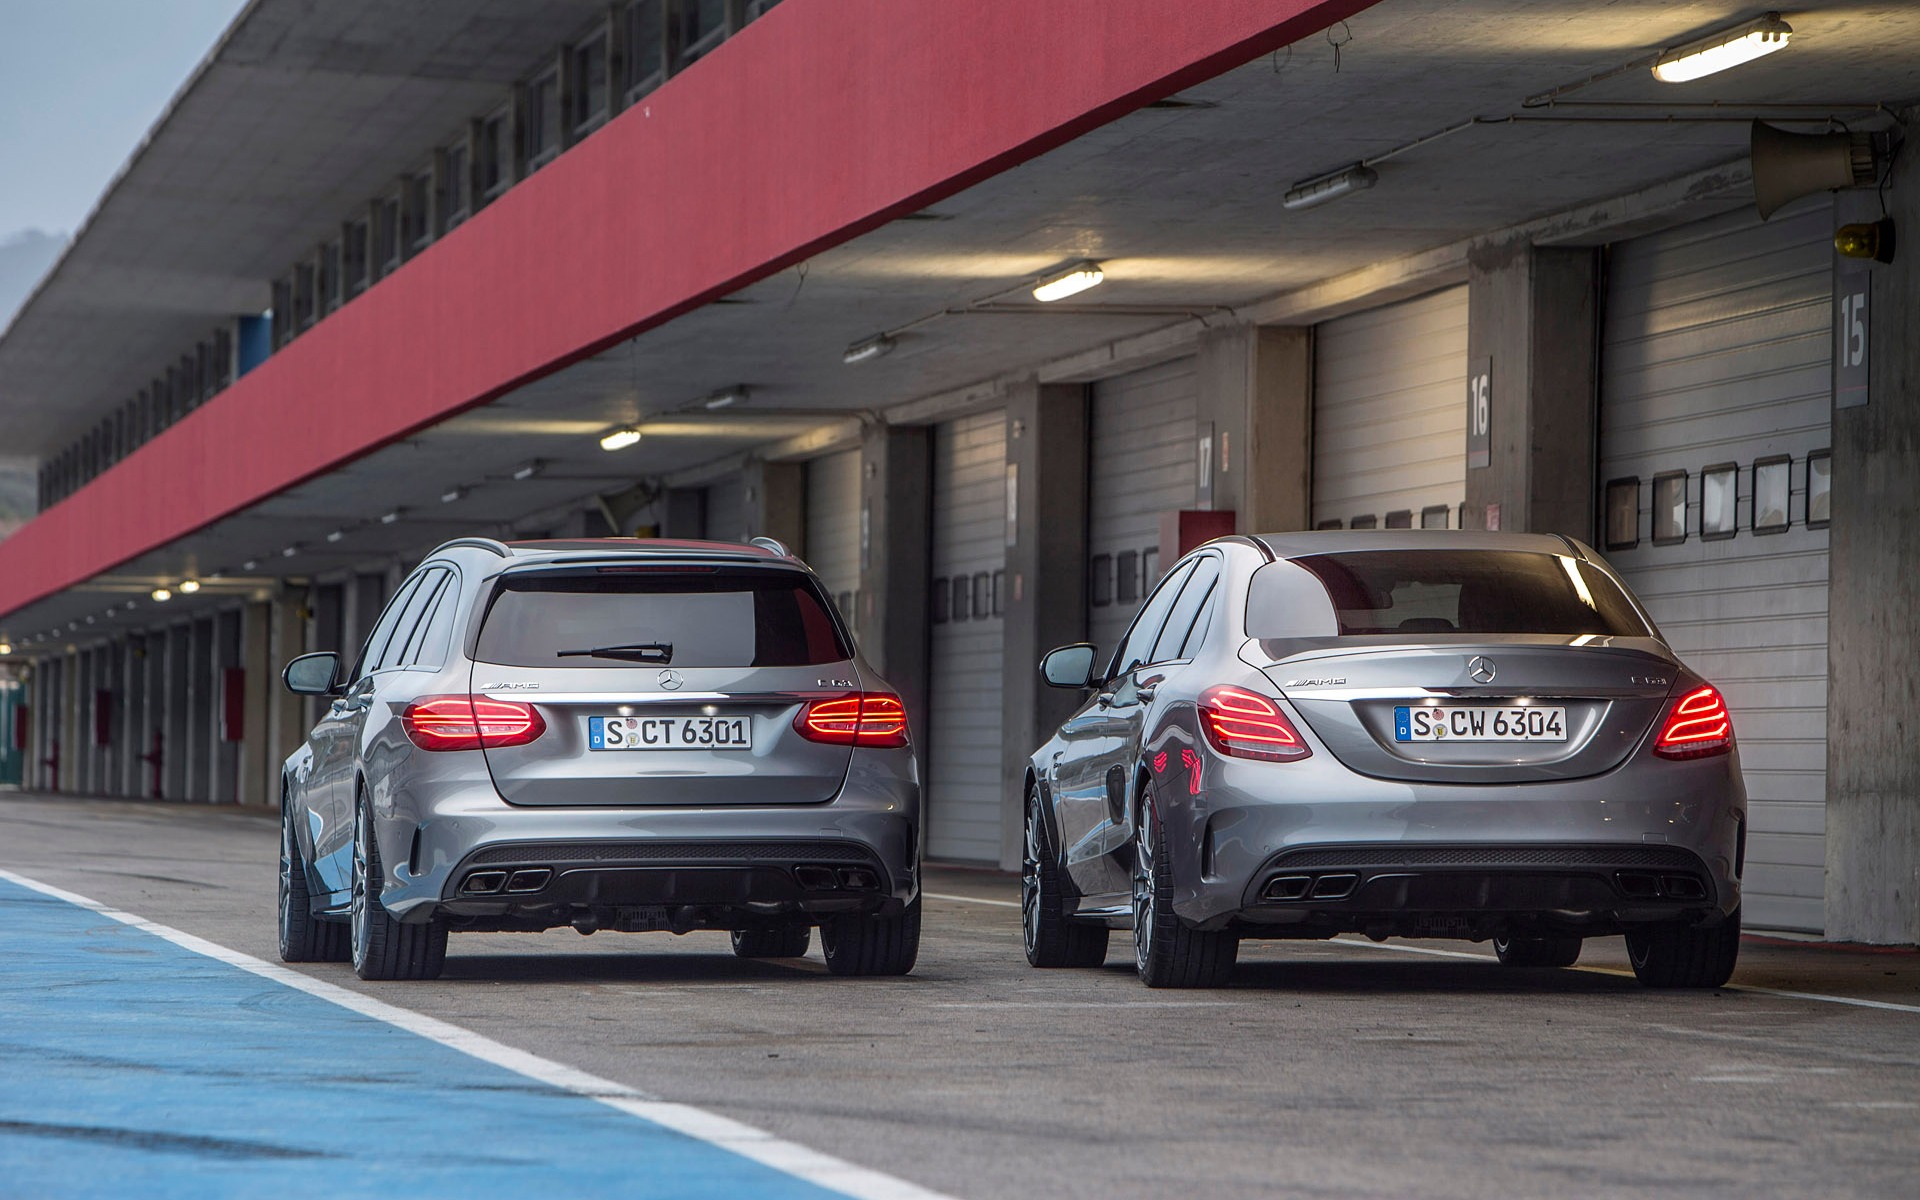 With the C 63 S wagon (on the left) you’d get cargo capacity and speed.